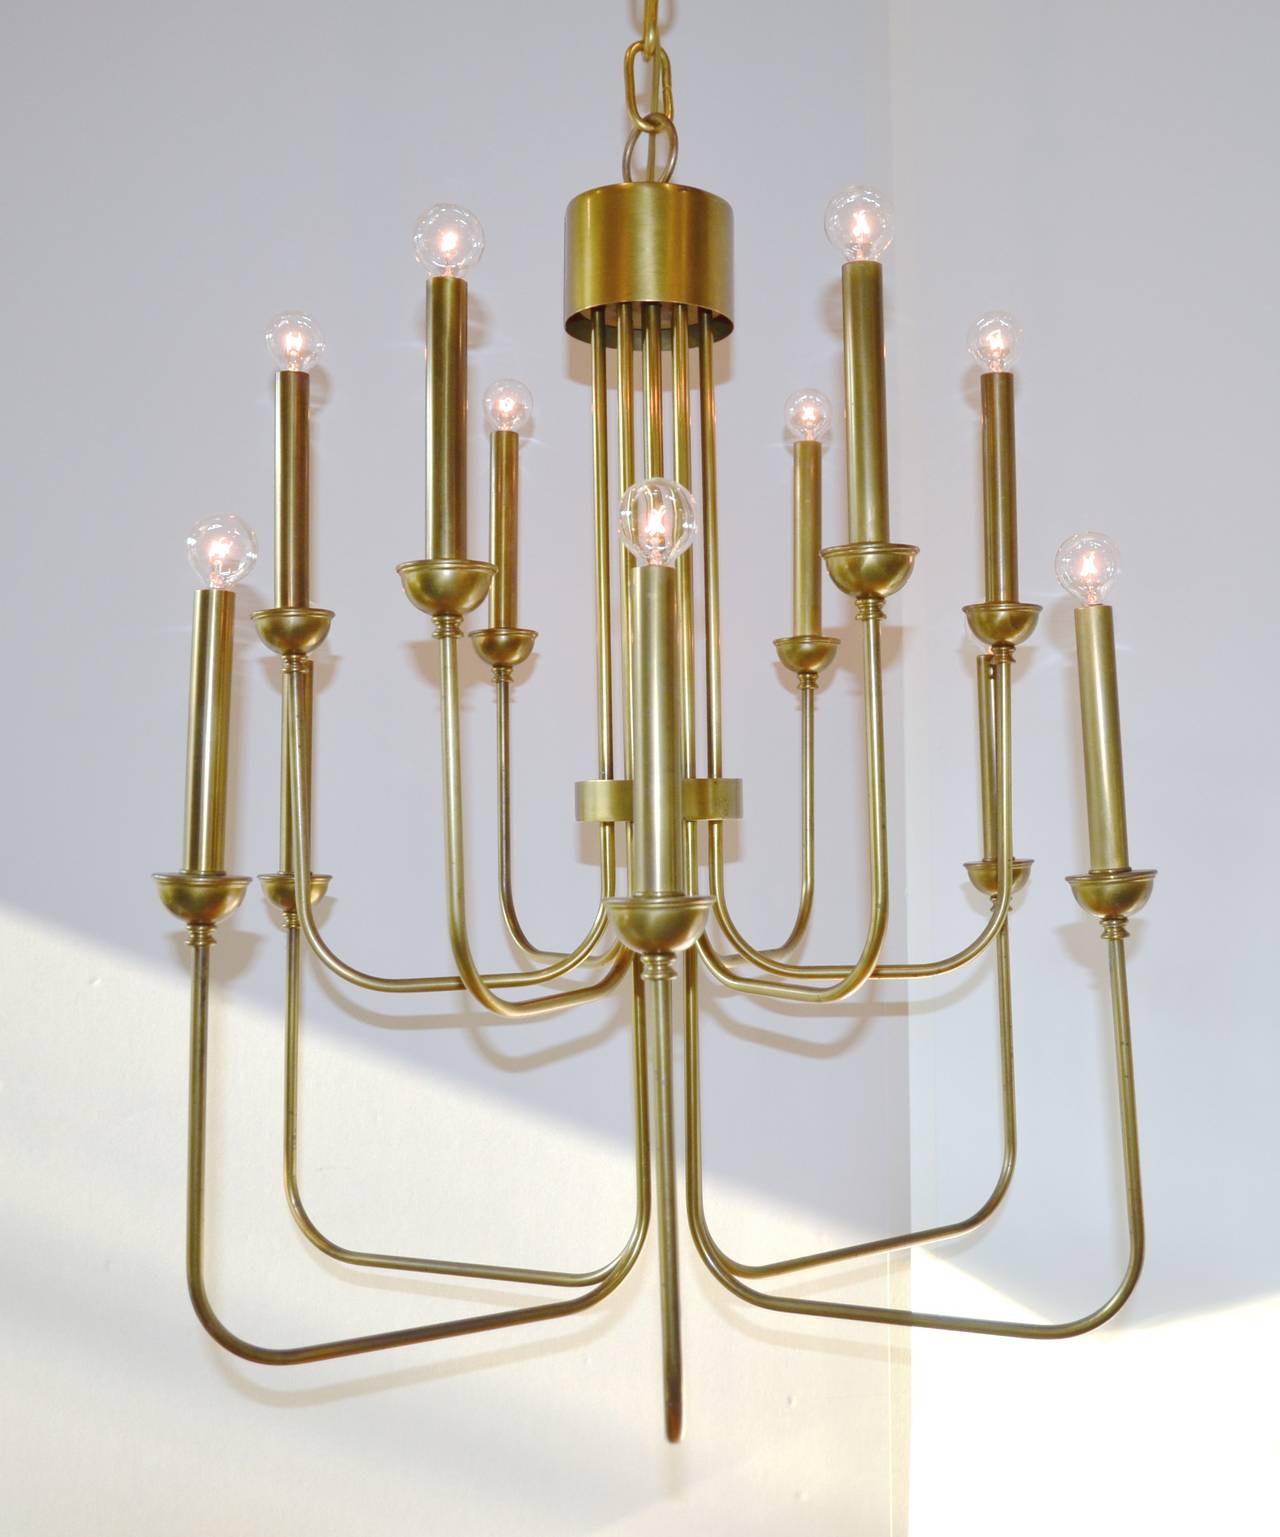 20th Century Tommi Parzinger Styled Brass Chandelier